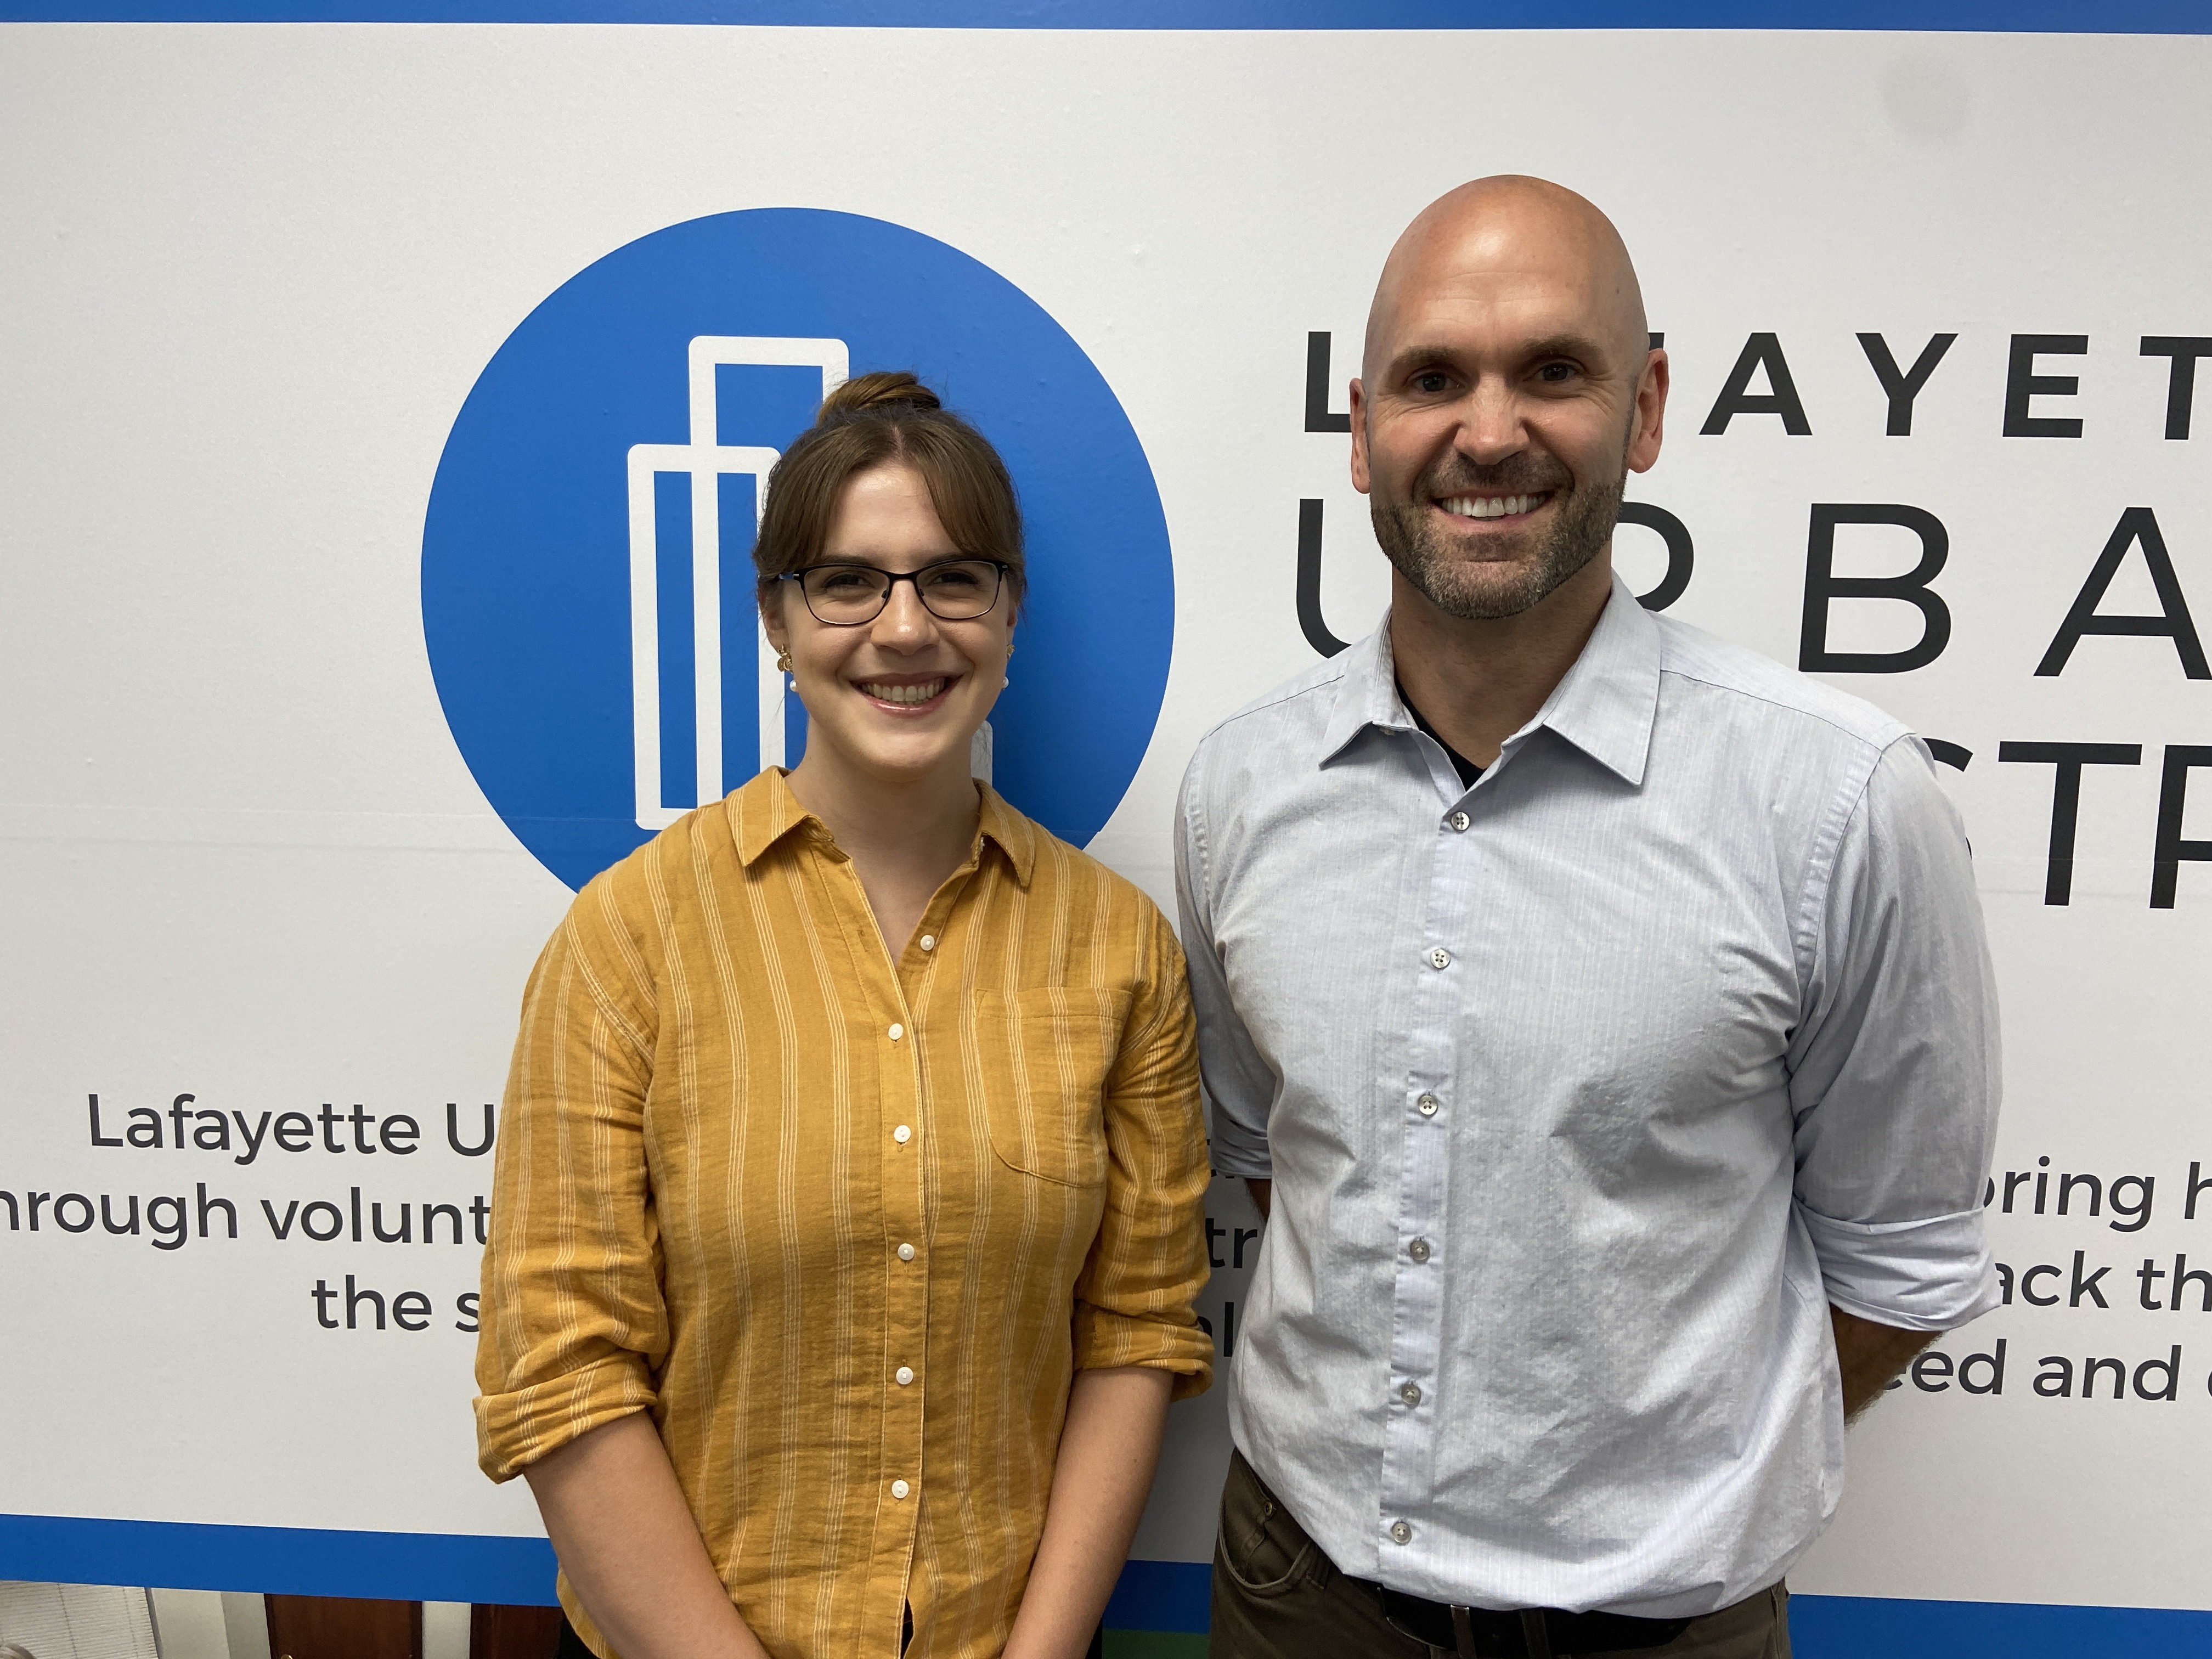 PhD student, Andrea Ens (left) poses with Lafayette Urban Ministry Executive Director, Wes Tillet (right)